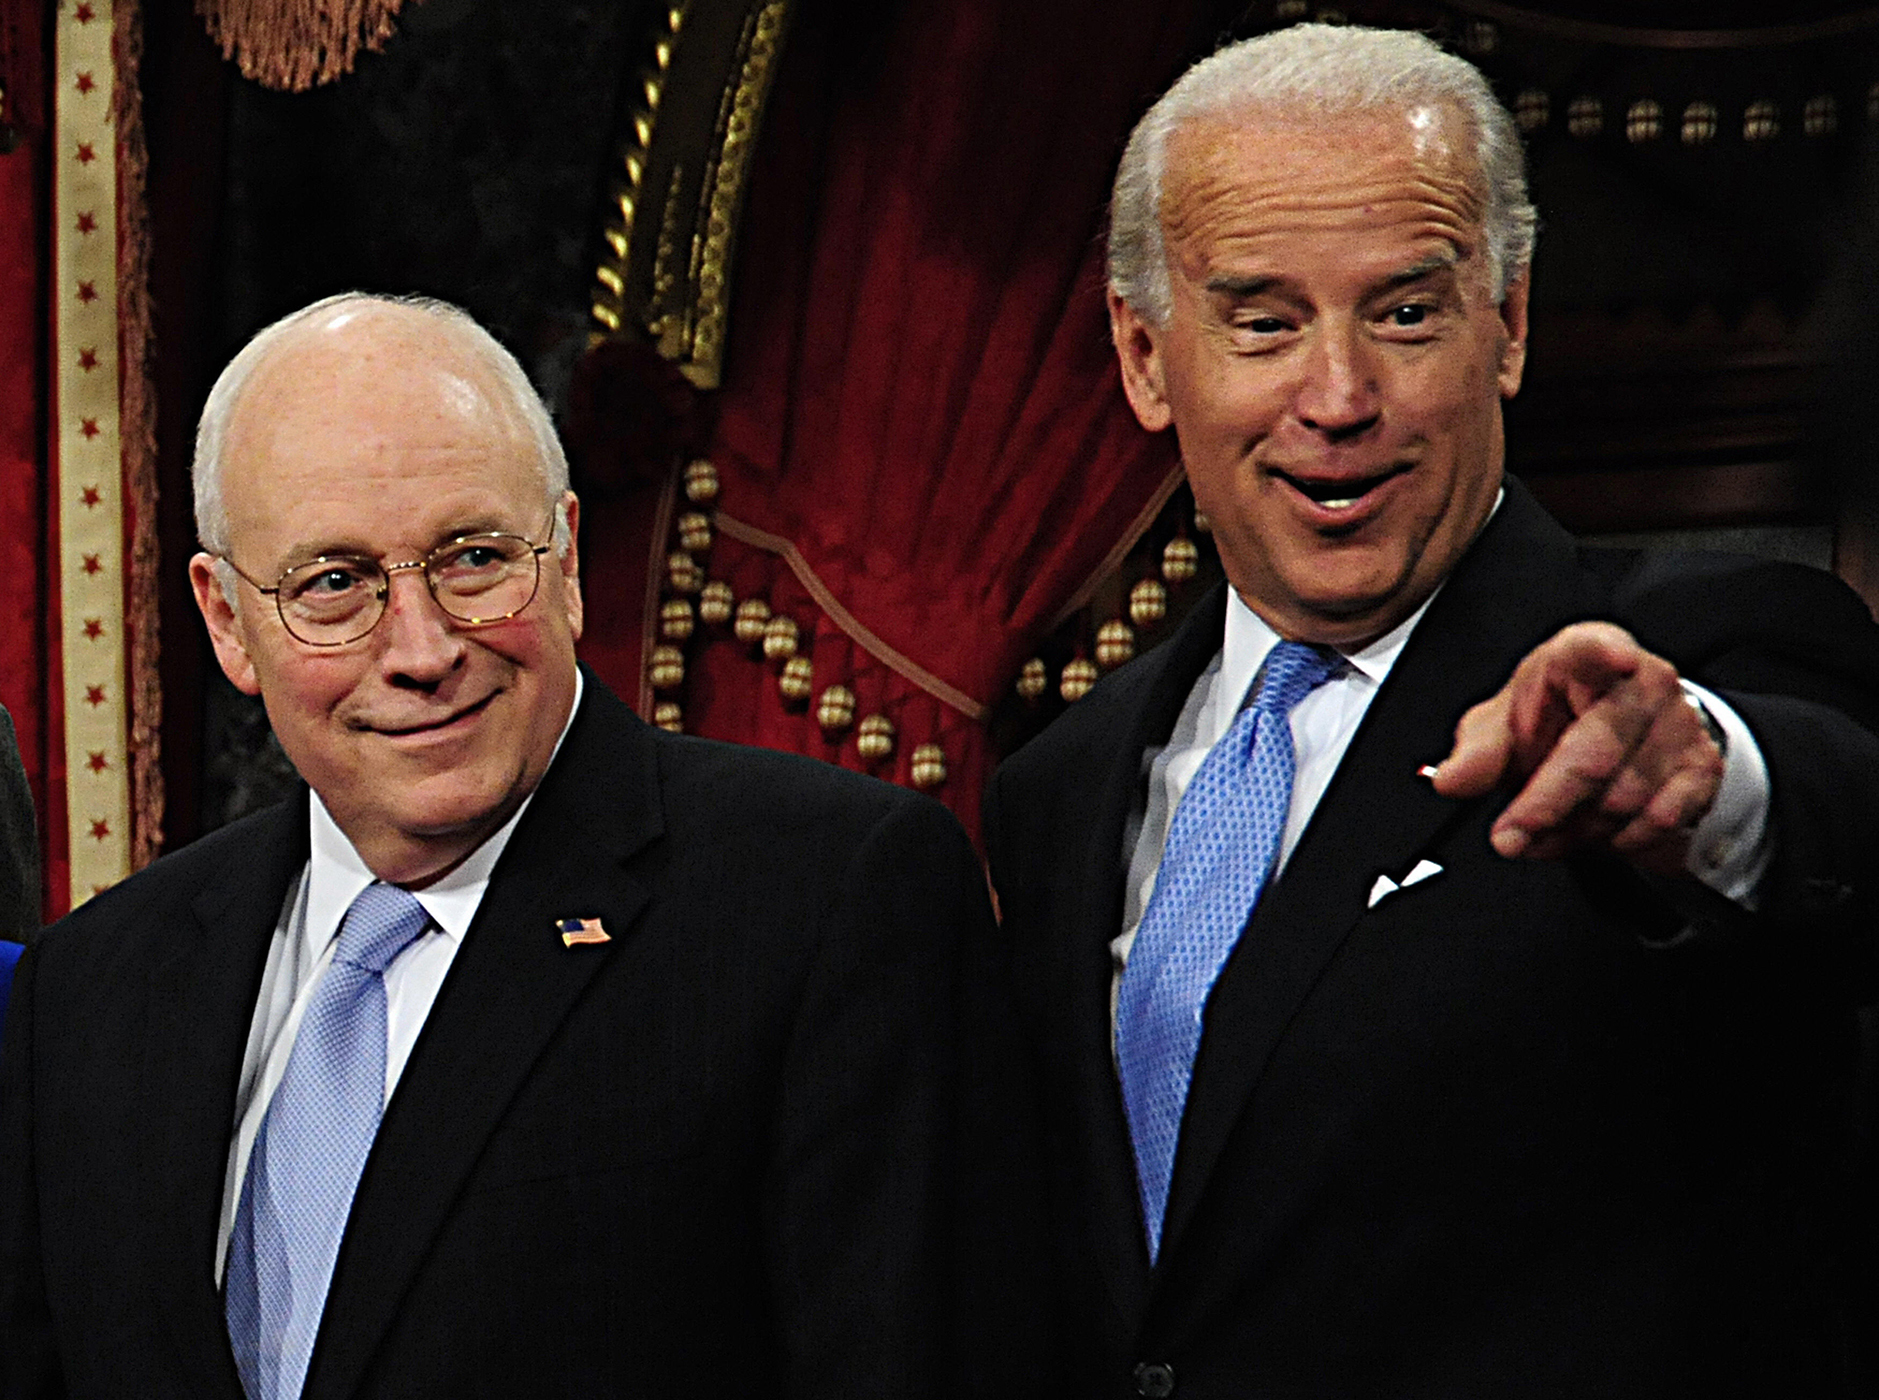 Dick cheney time traveling villain